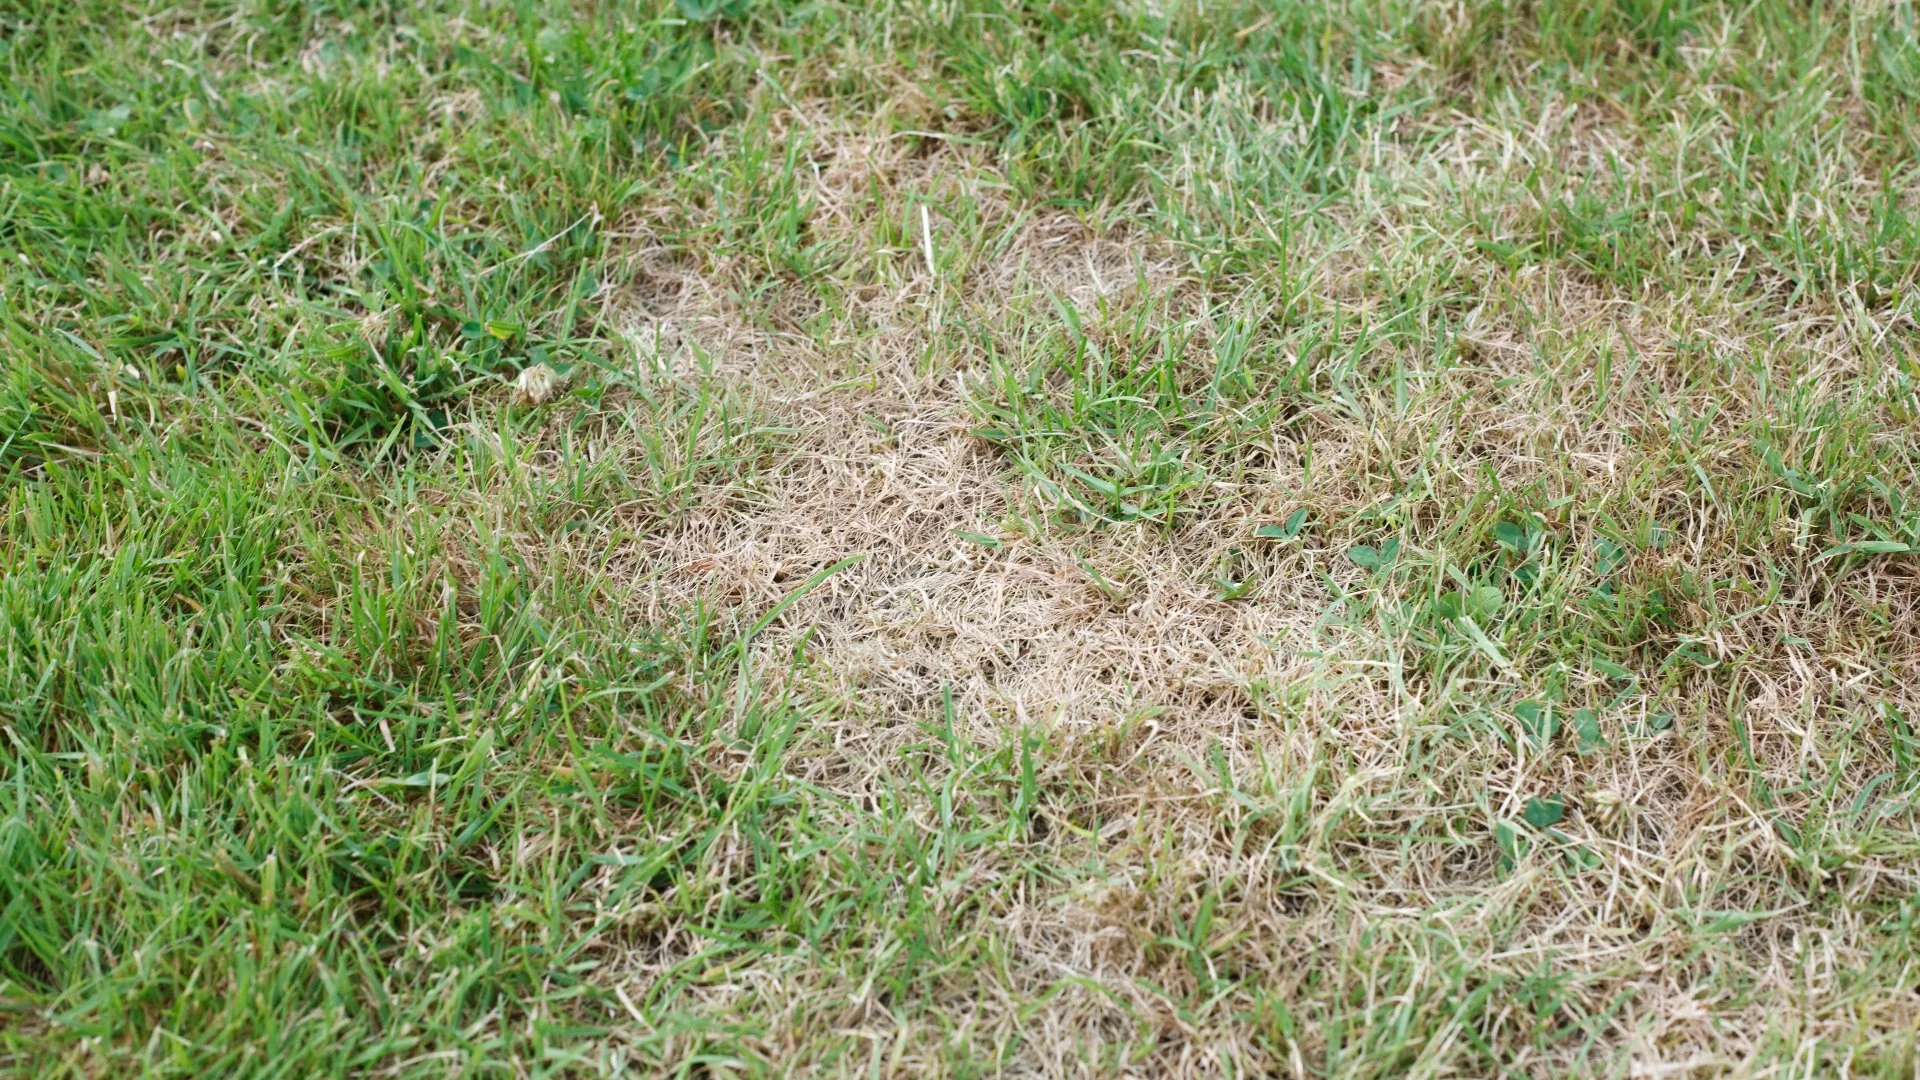 Gray Leaf Spot Is a Damaging Lawn Disease That's Common on Lawns in Texas!